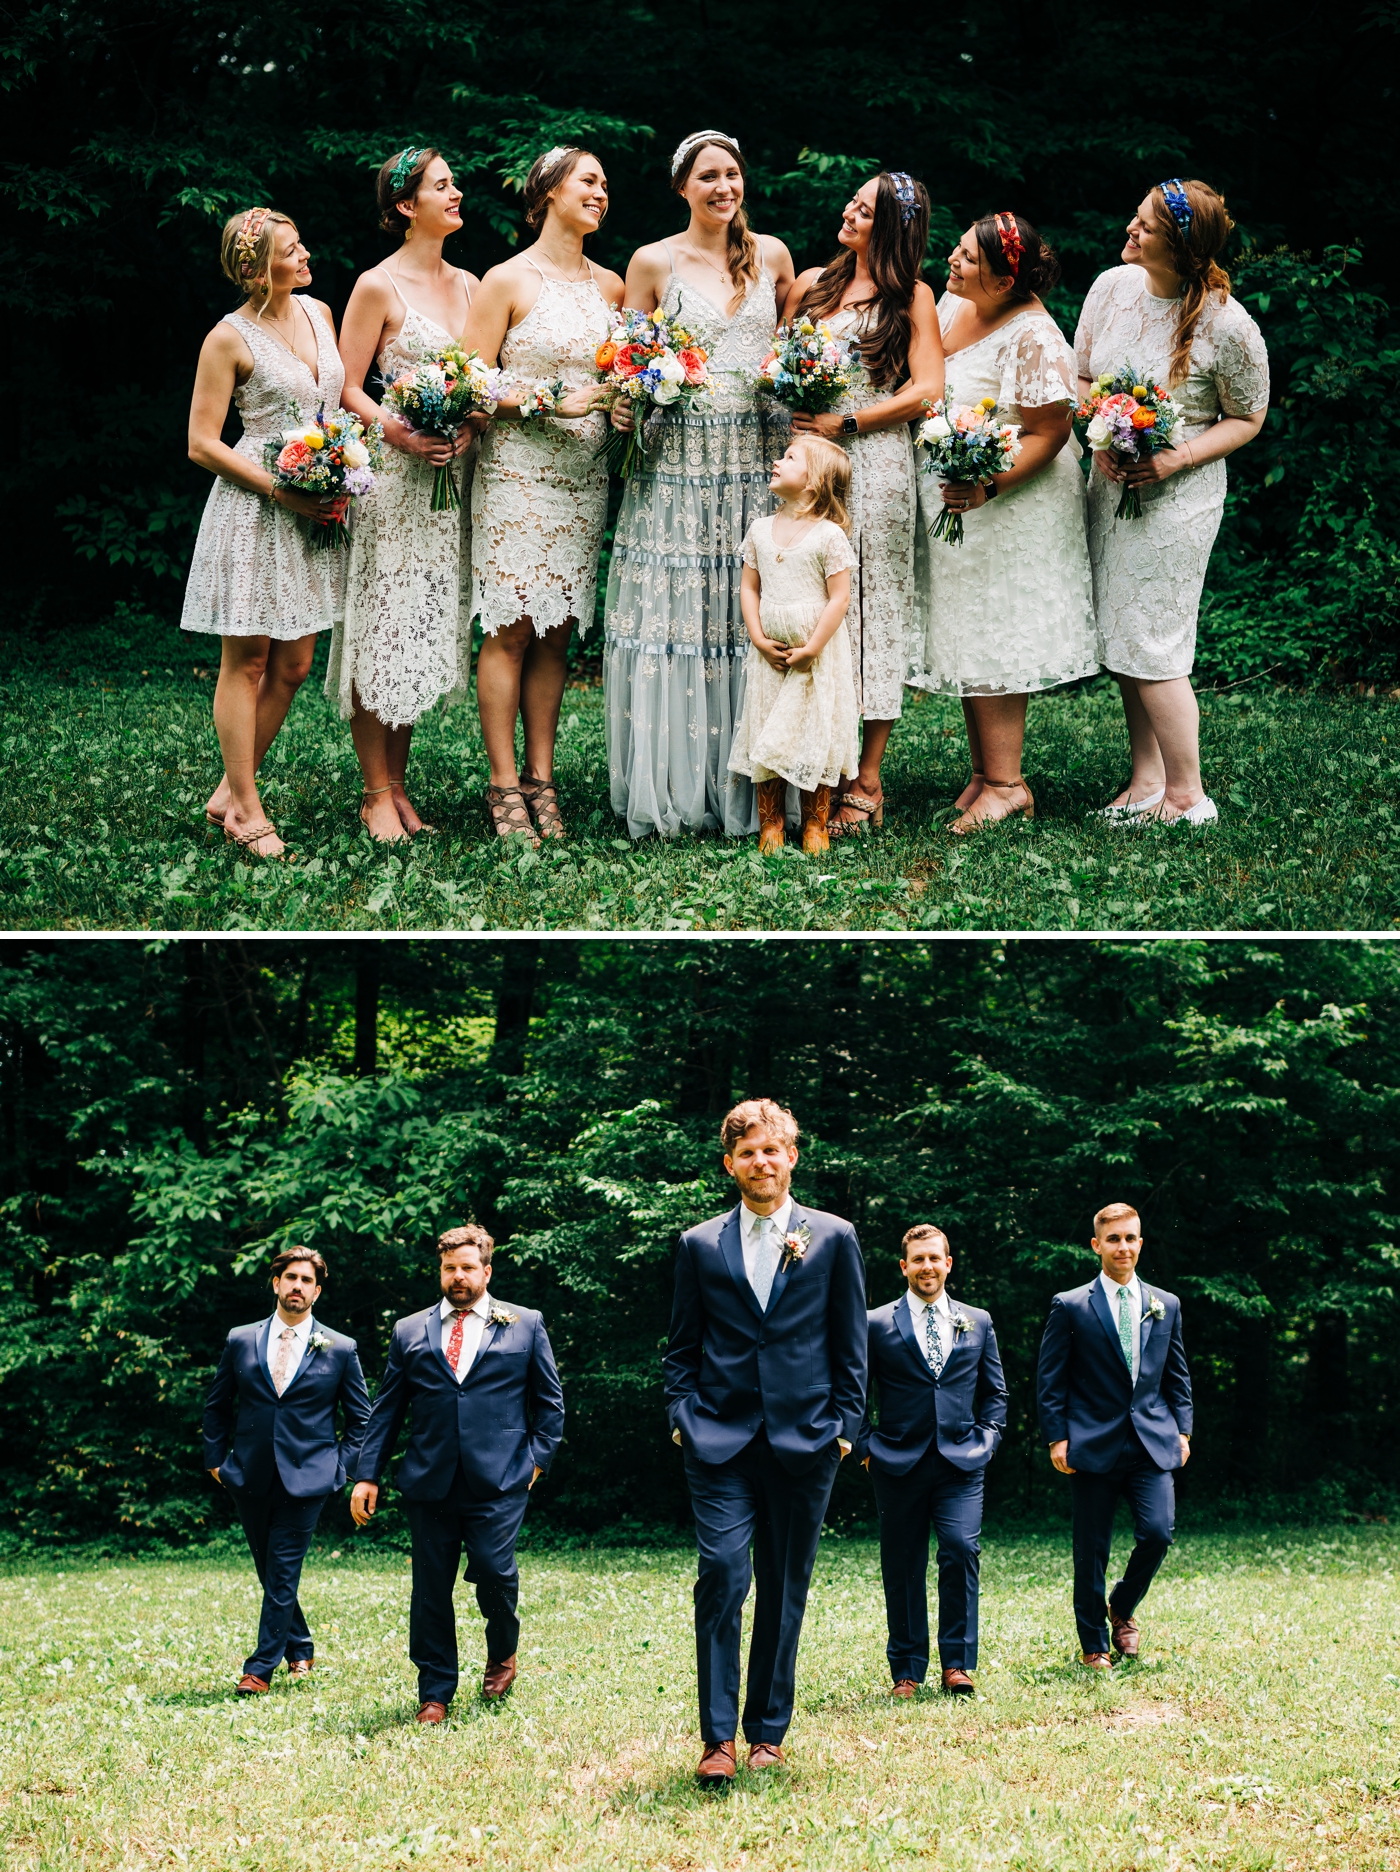 Bridal party portraits, with the bridesmaids in white lace dresses